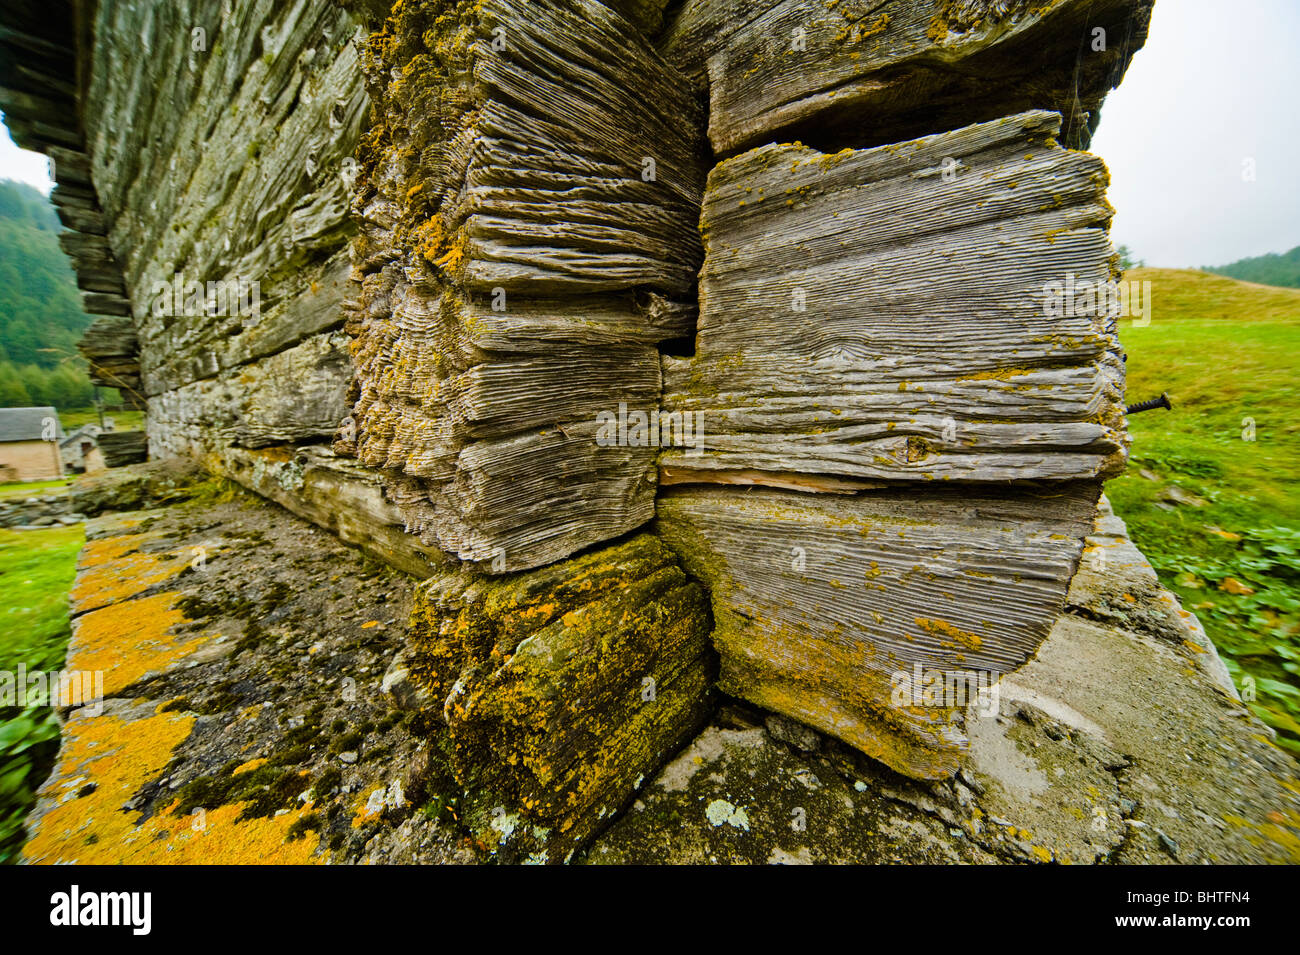 Weathered logs of old wooden granary at Alpe Devero, Parco Naturale Veglia Devero, Piemonte, Italy Stock Photo